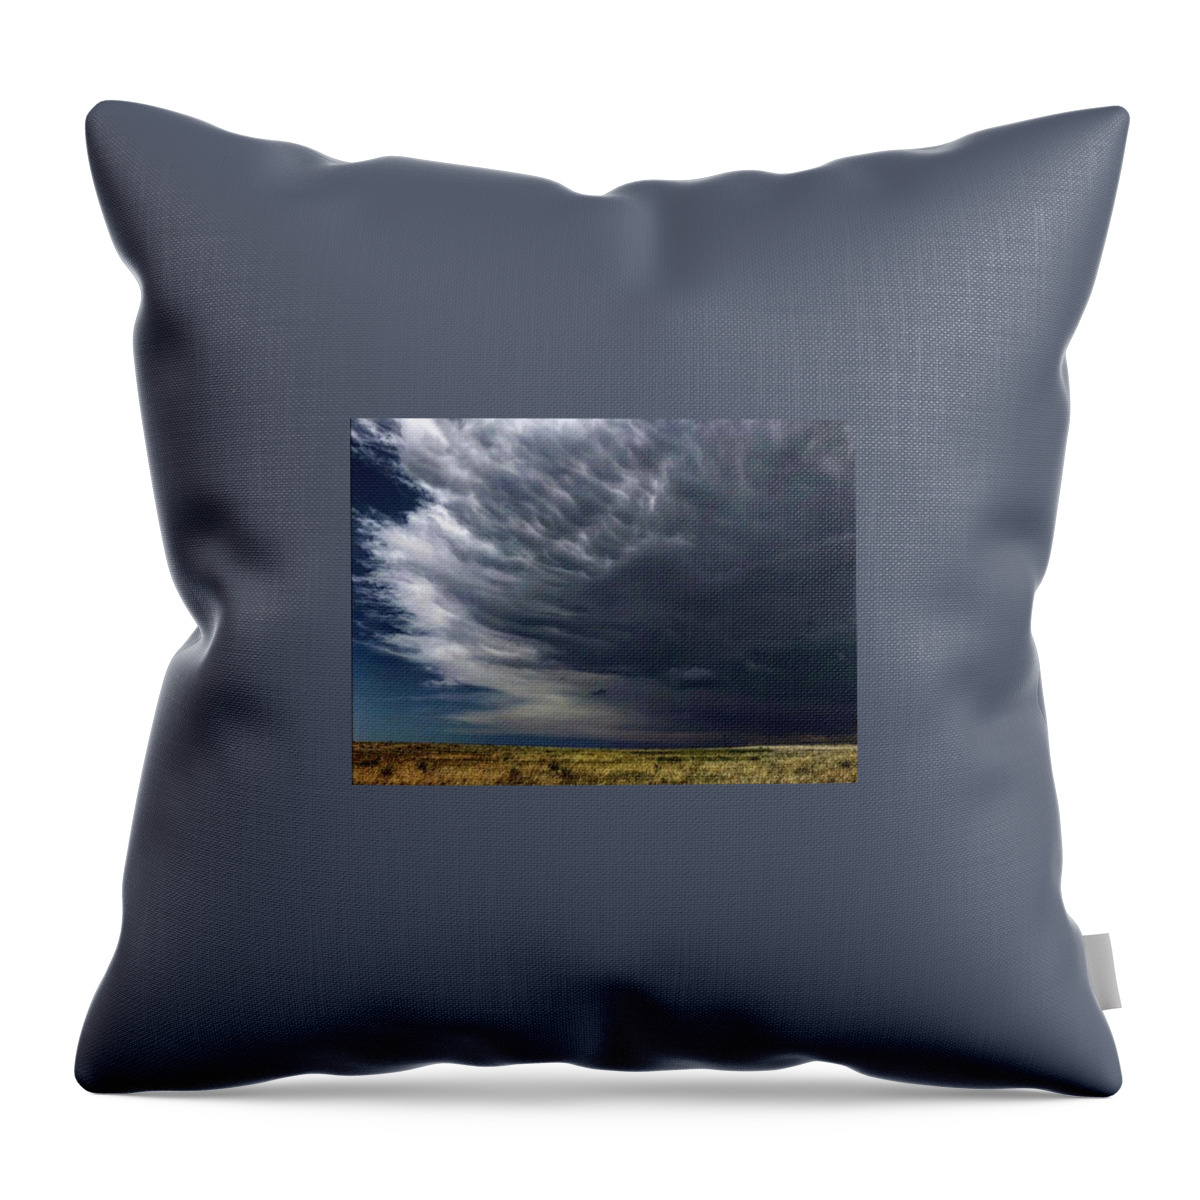 Iphonography Throw Pillow featuring the photograph Iphonography Clouds 1 by Julie Powell